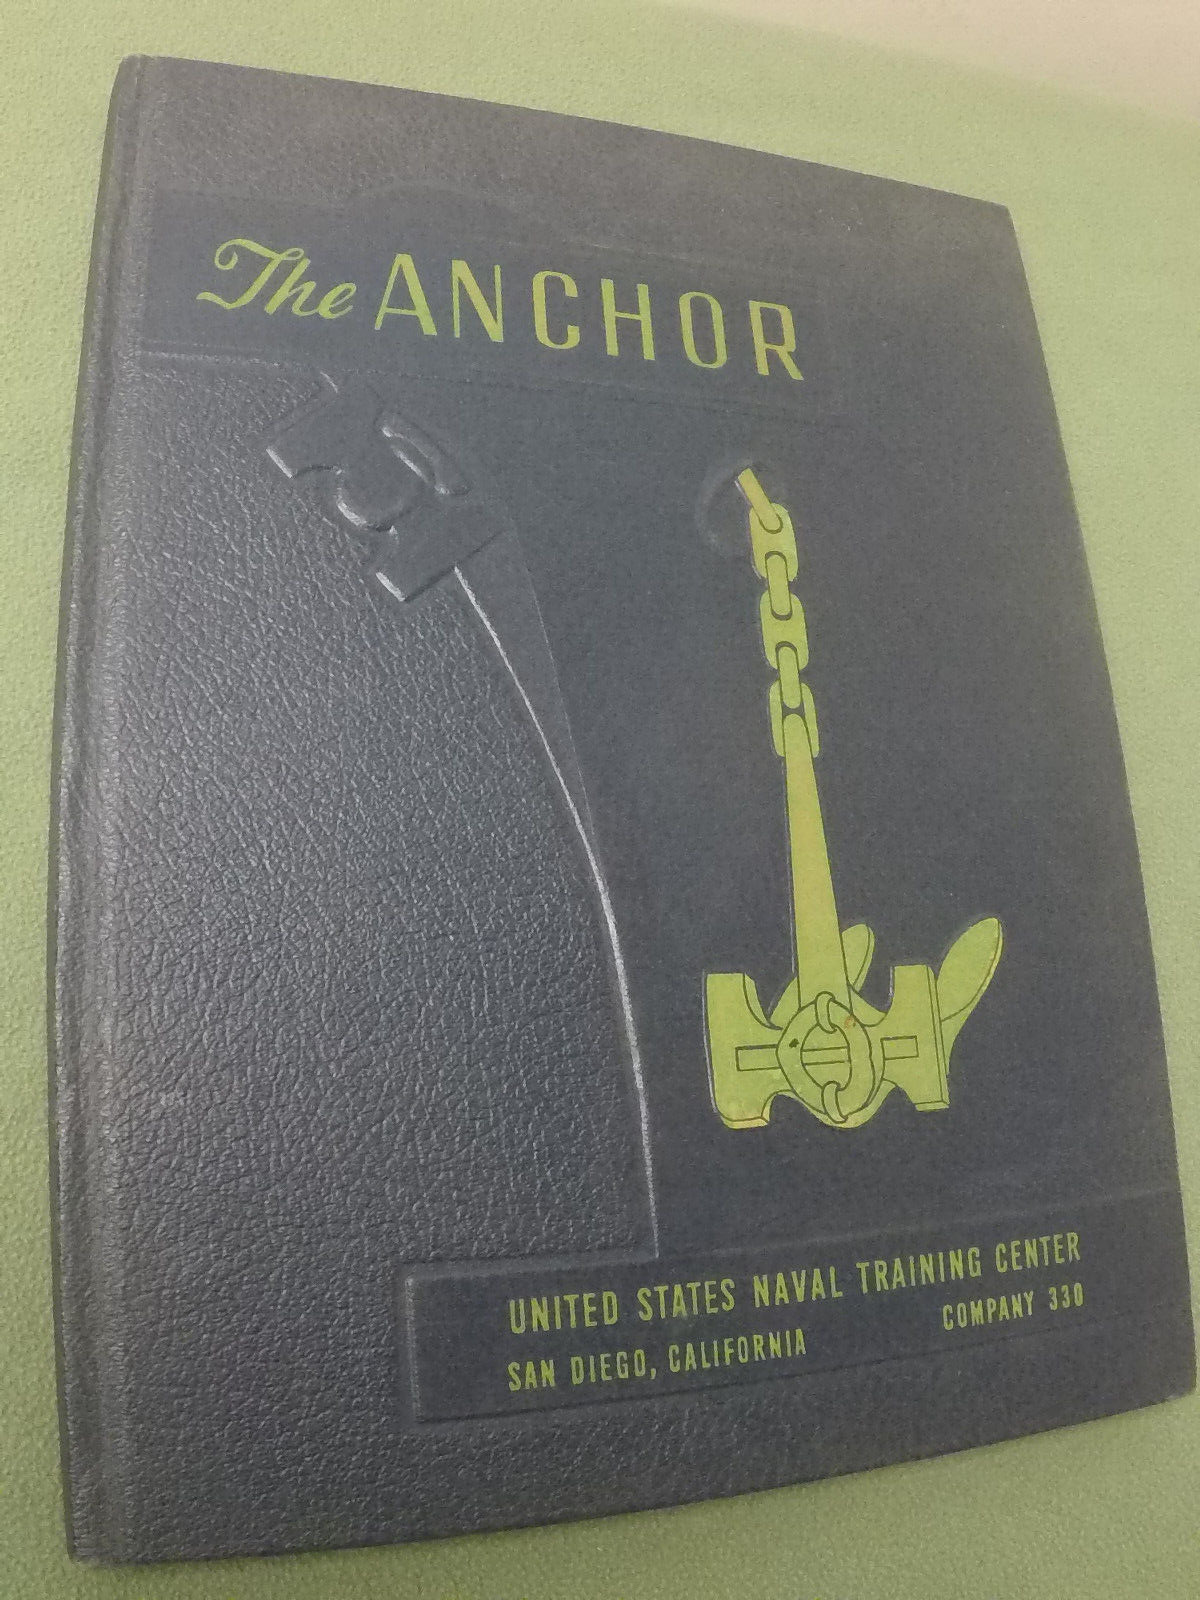 Nov 1957 - The Anchor US Naval Training Center Company 330 San Diego Yearbook